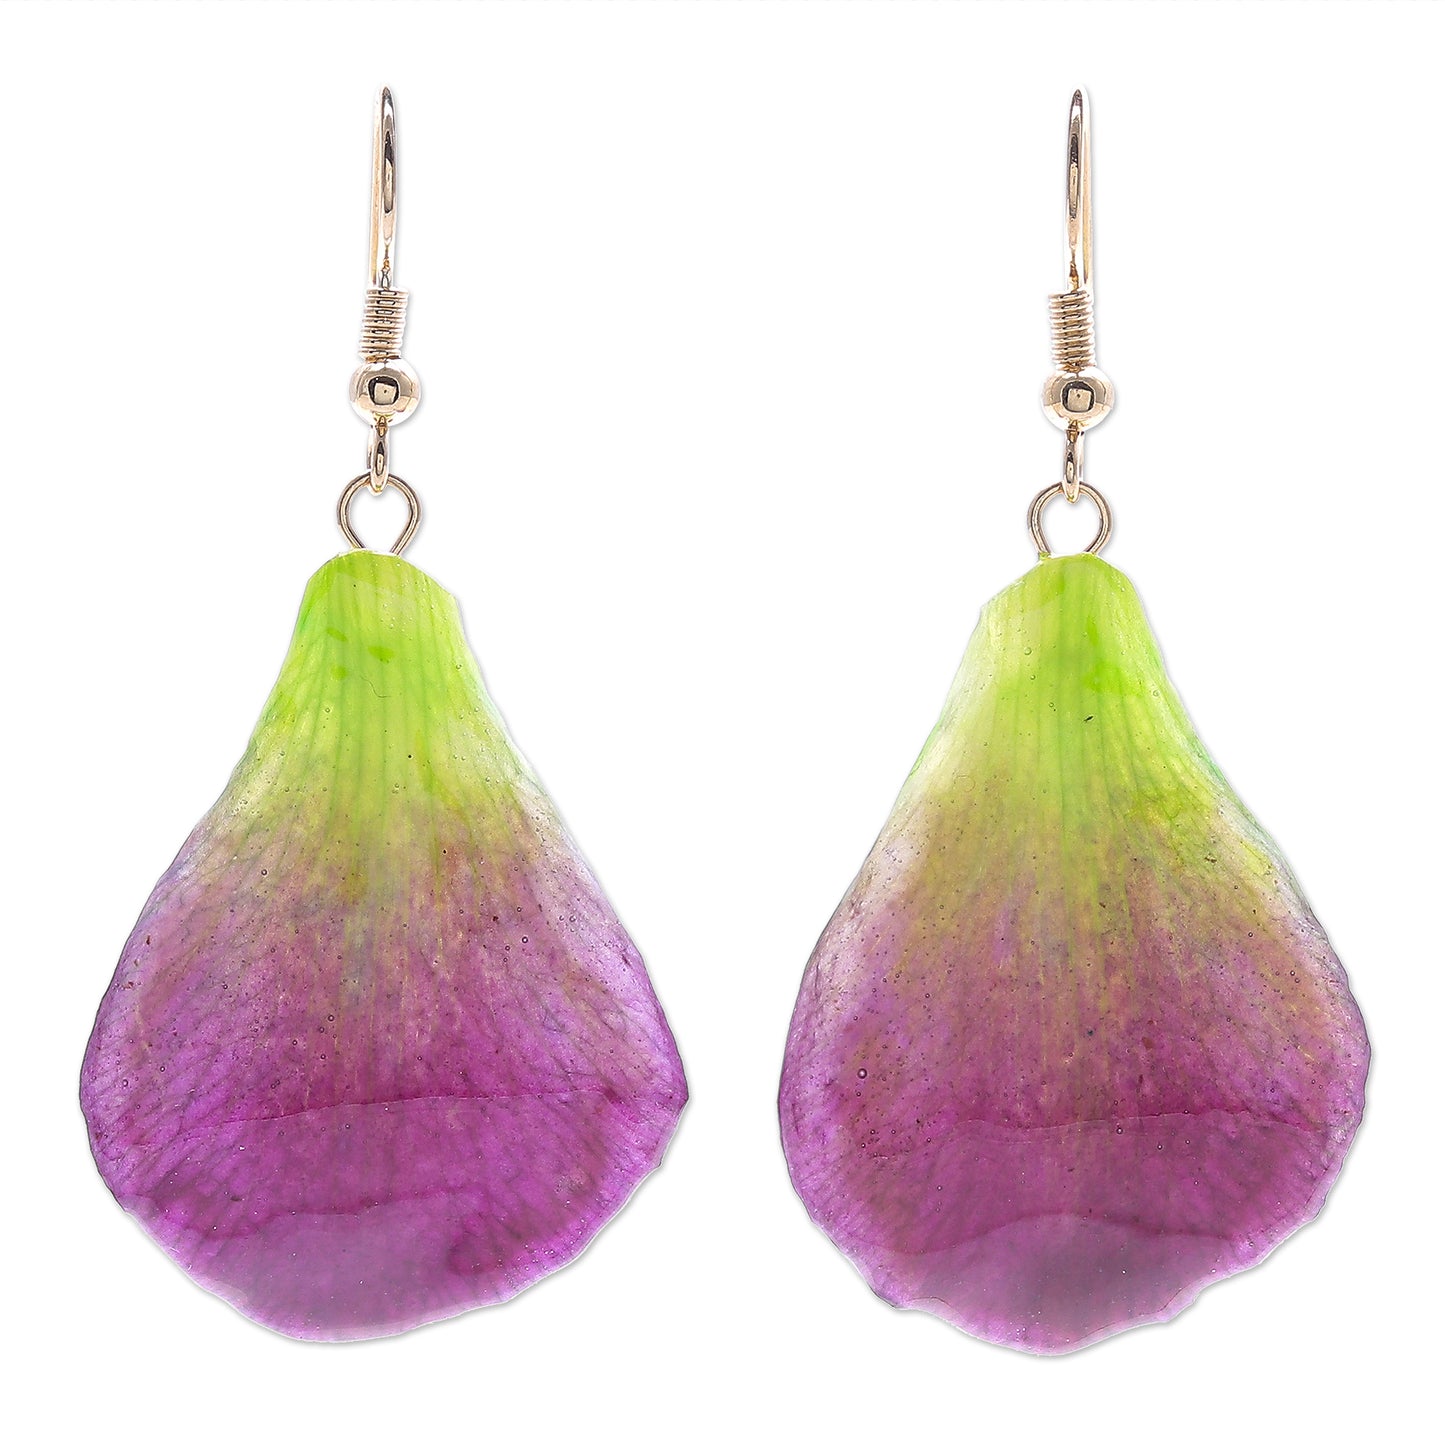 Summer Treat in Berry Gold-Plated Orchid Petal Dangle Earrings